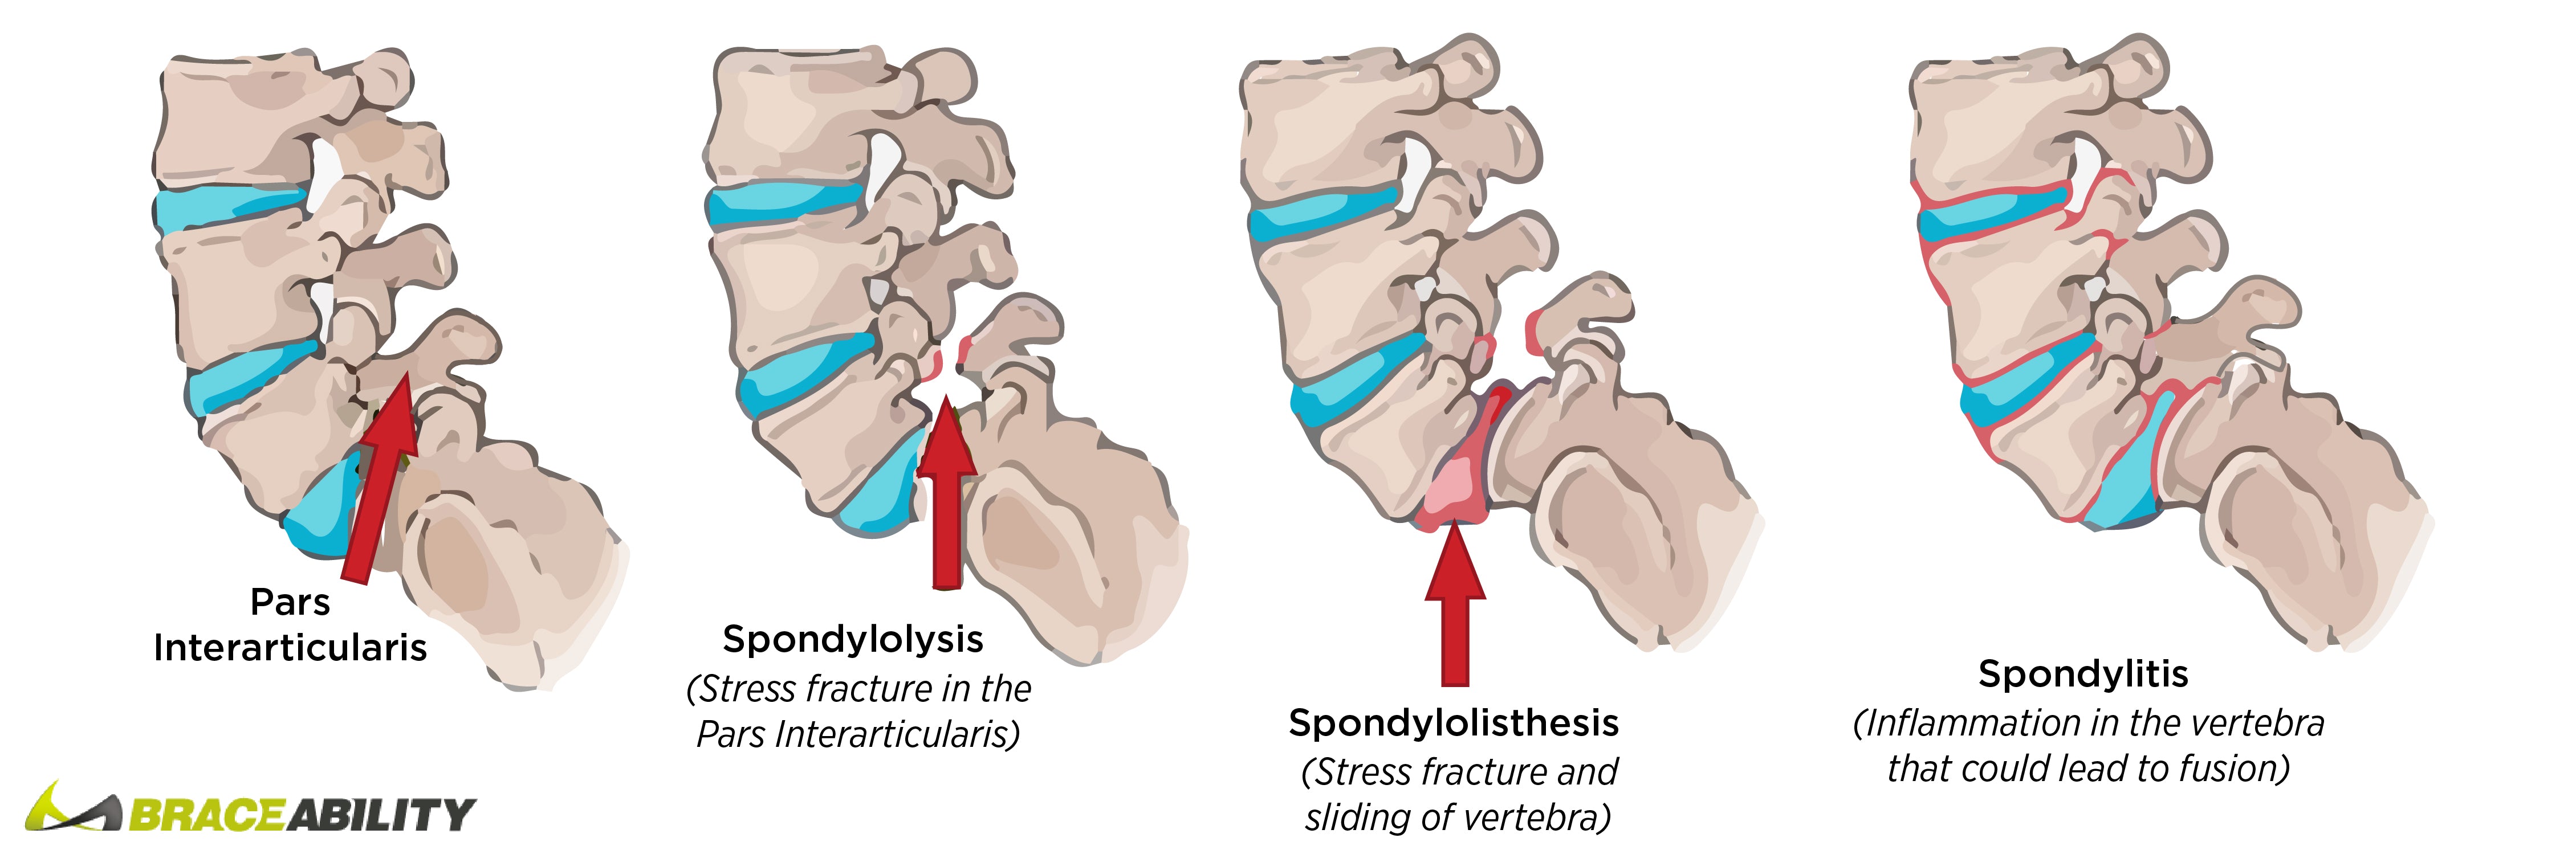 how to tell the difference between spondylolysis, spondylolisthesis and spondylitis